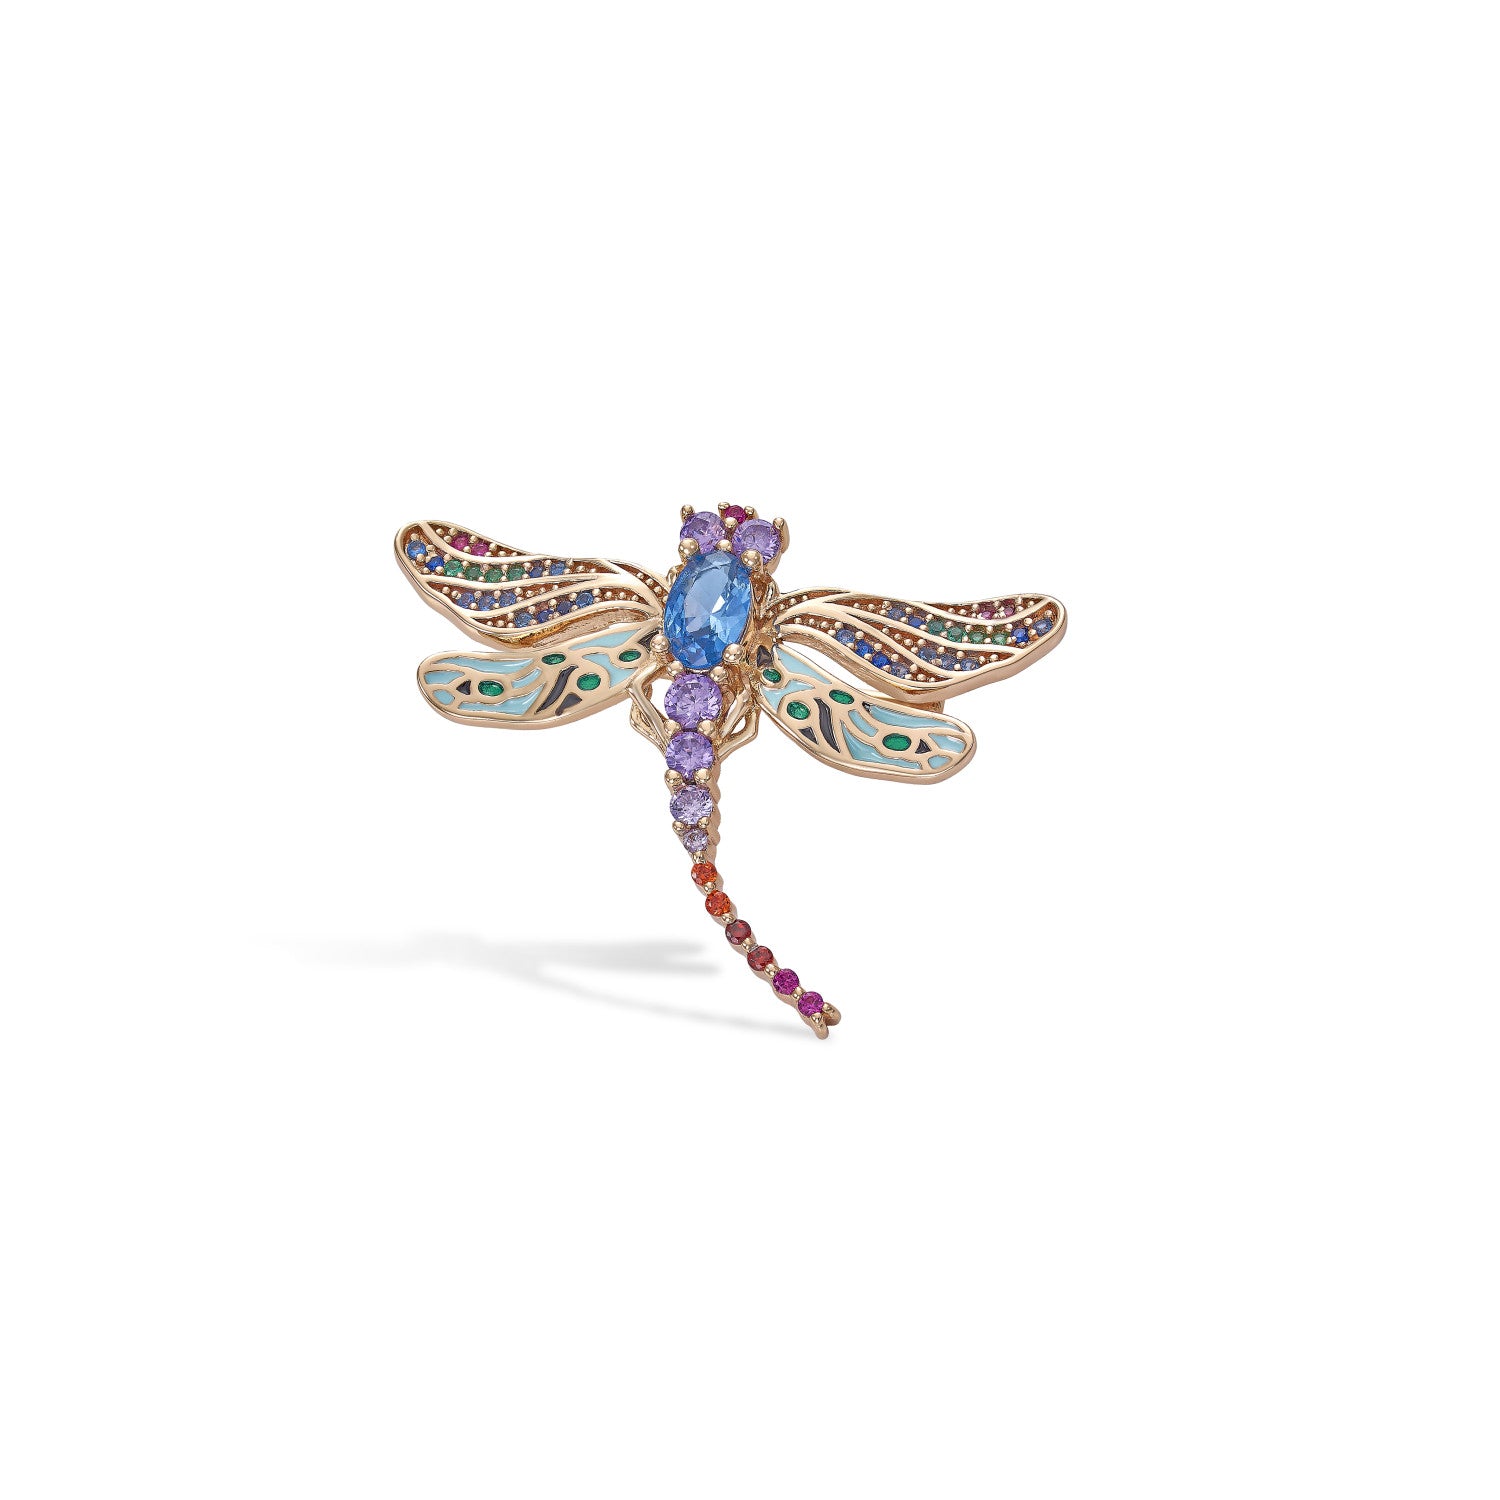 Silver brooch insect design in blue and violet tones